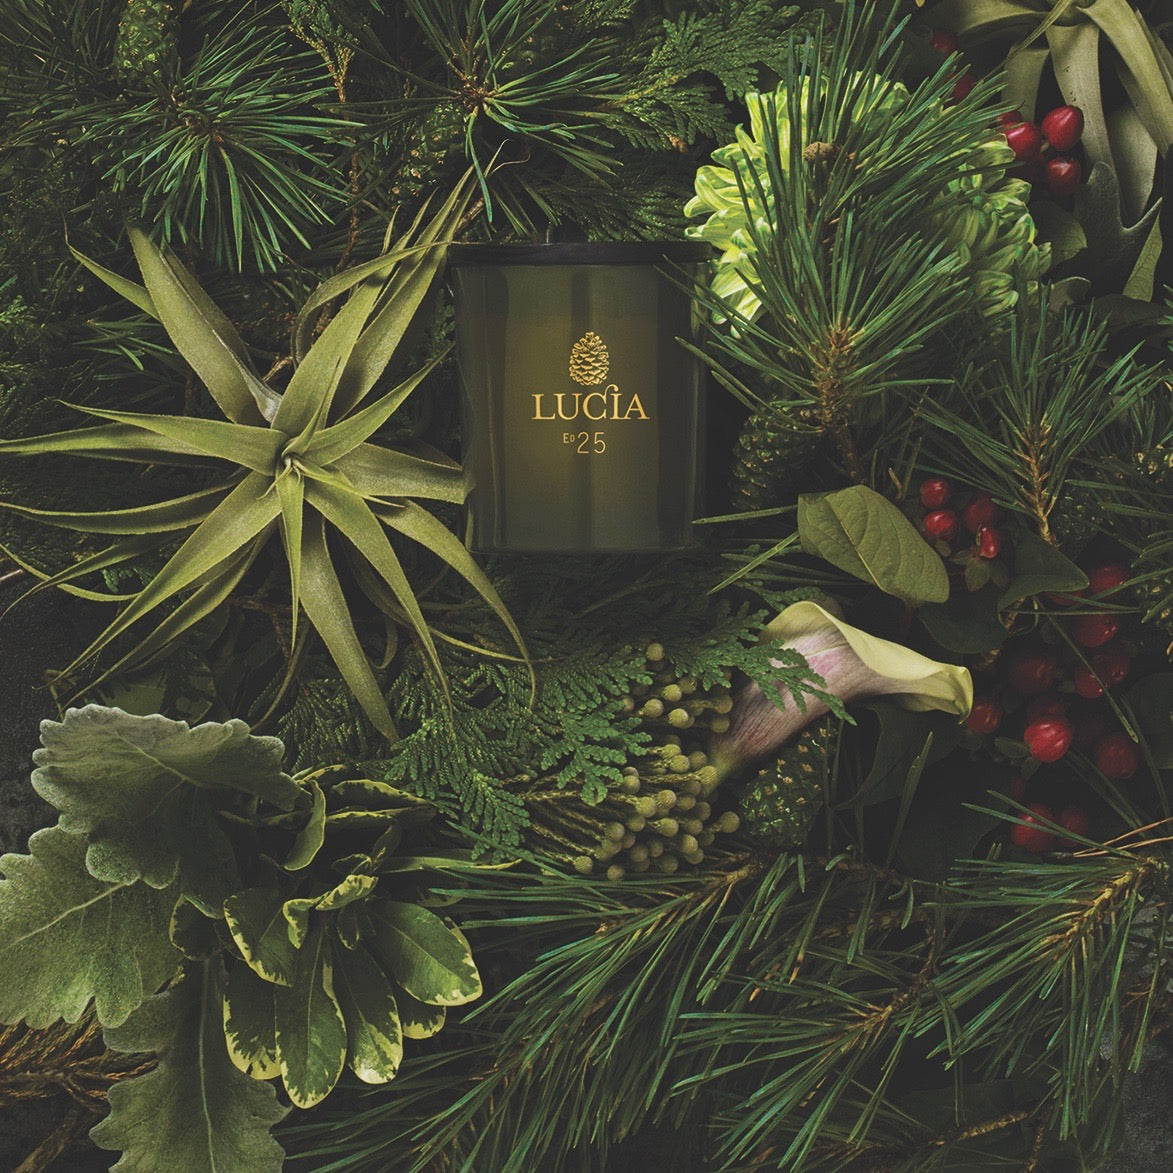 Lucia Les Saisons Holiday Collection